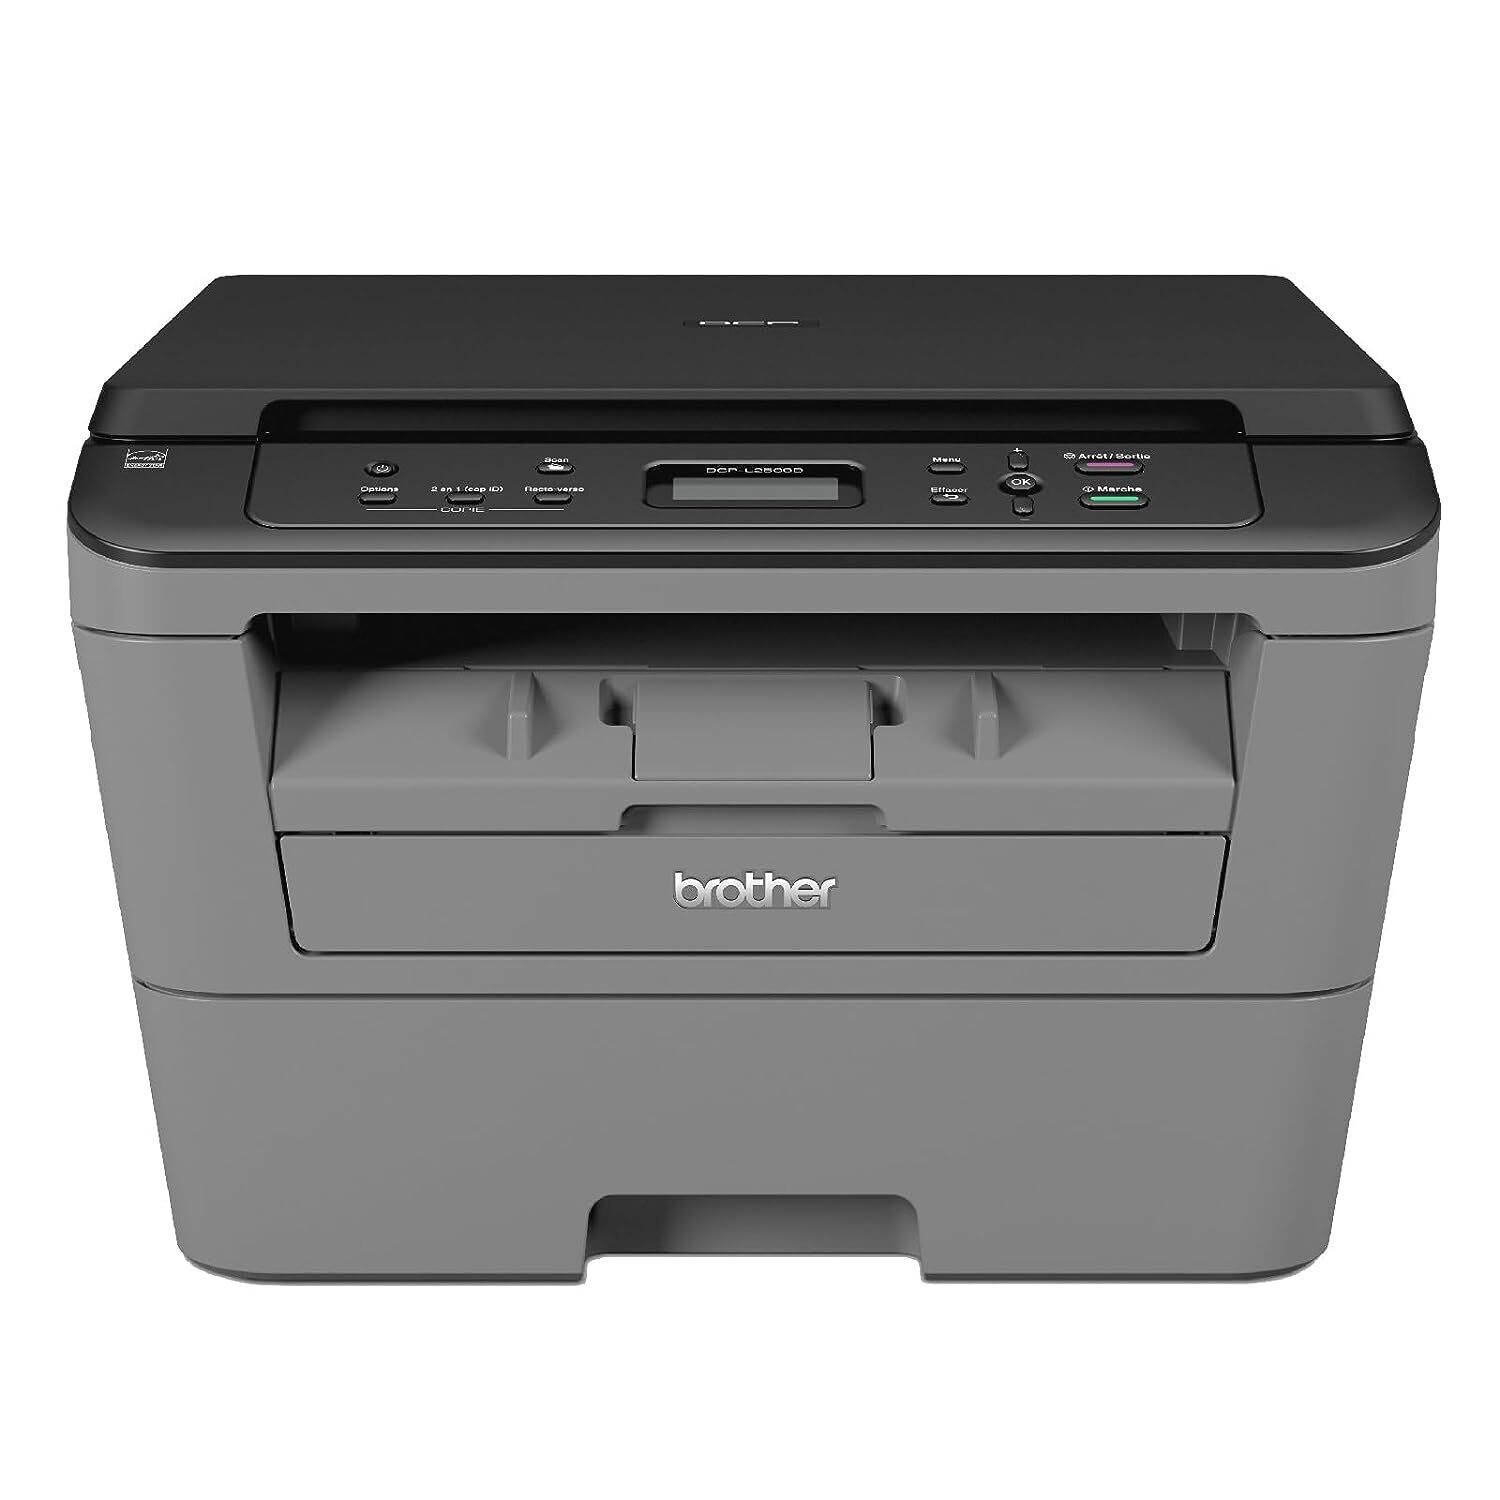 Brother DCP-L2520D Mono Laser Multi-Function Printer